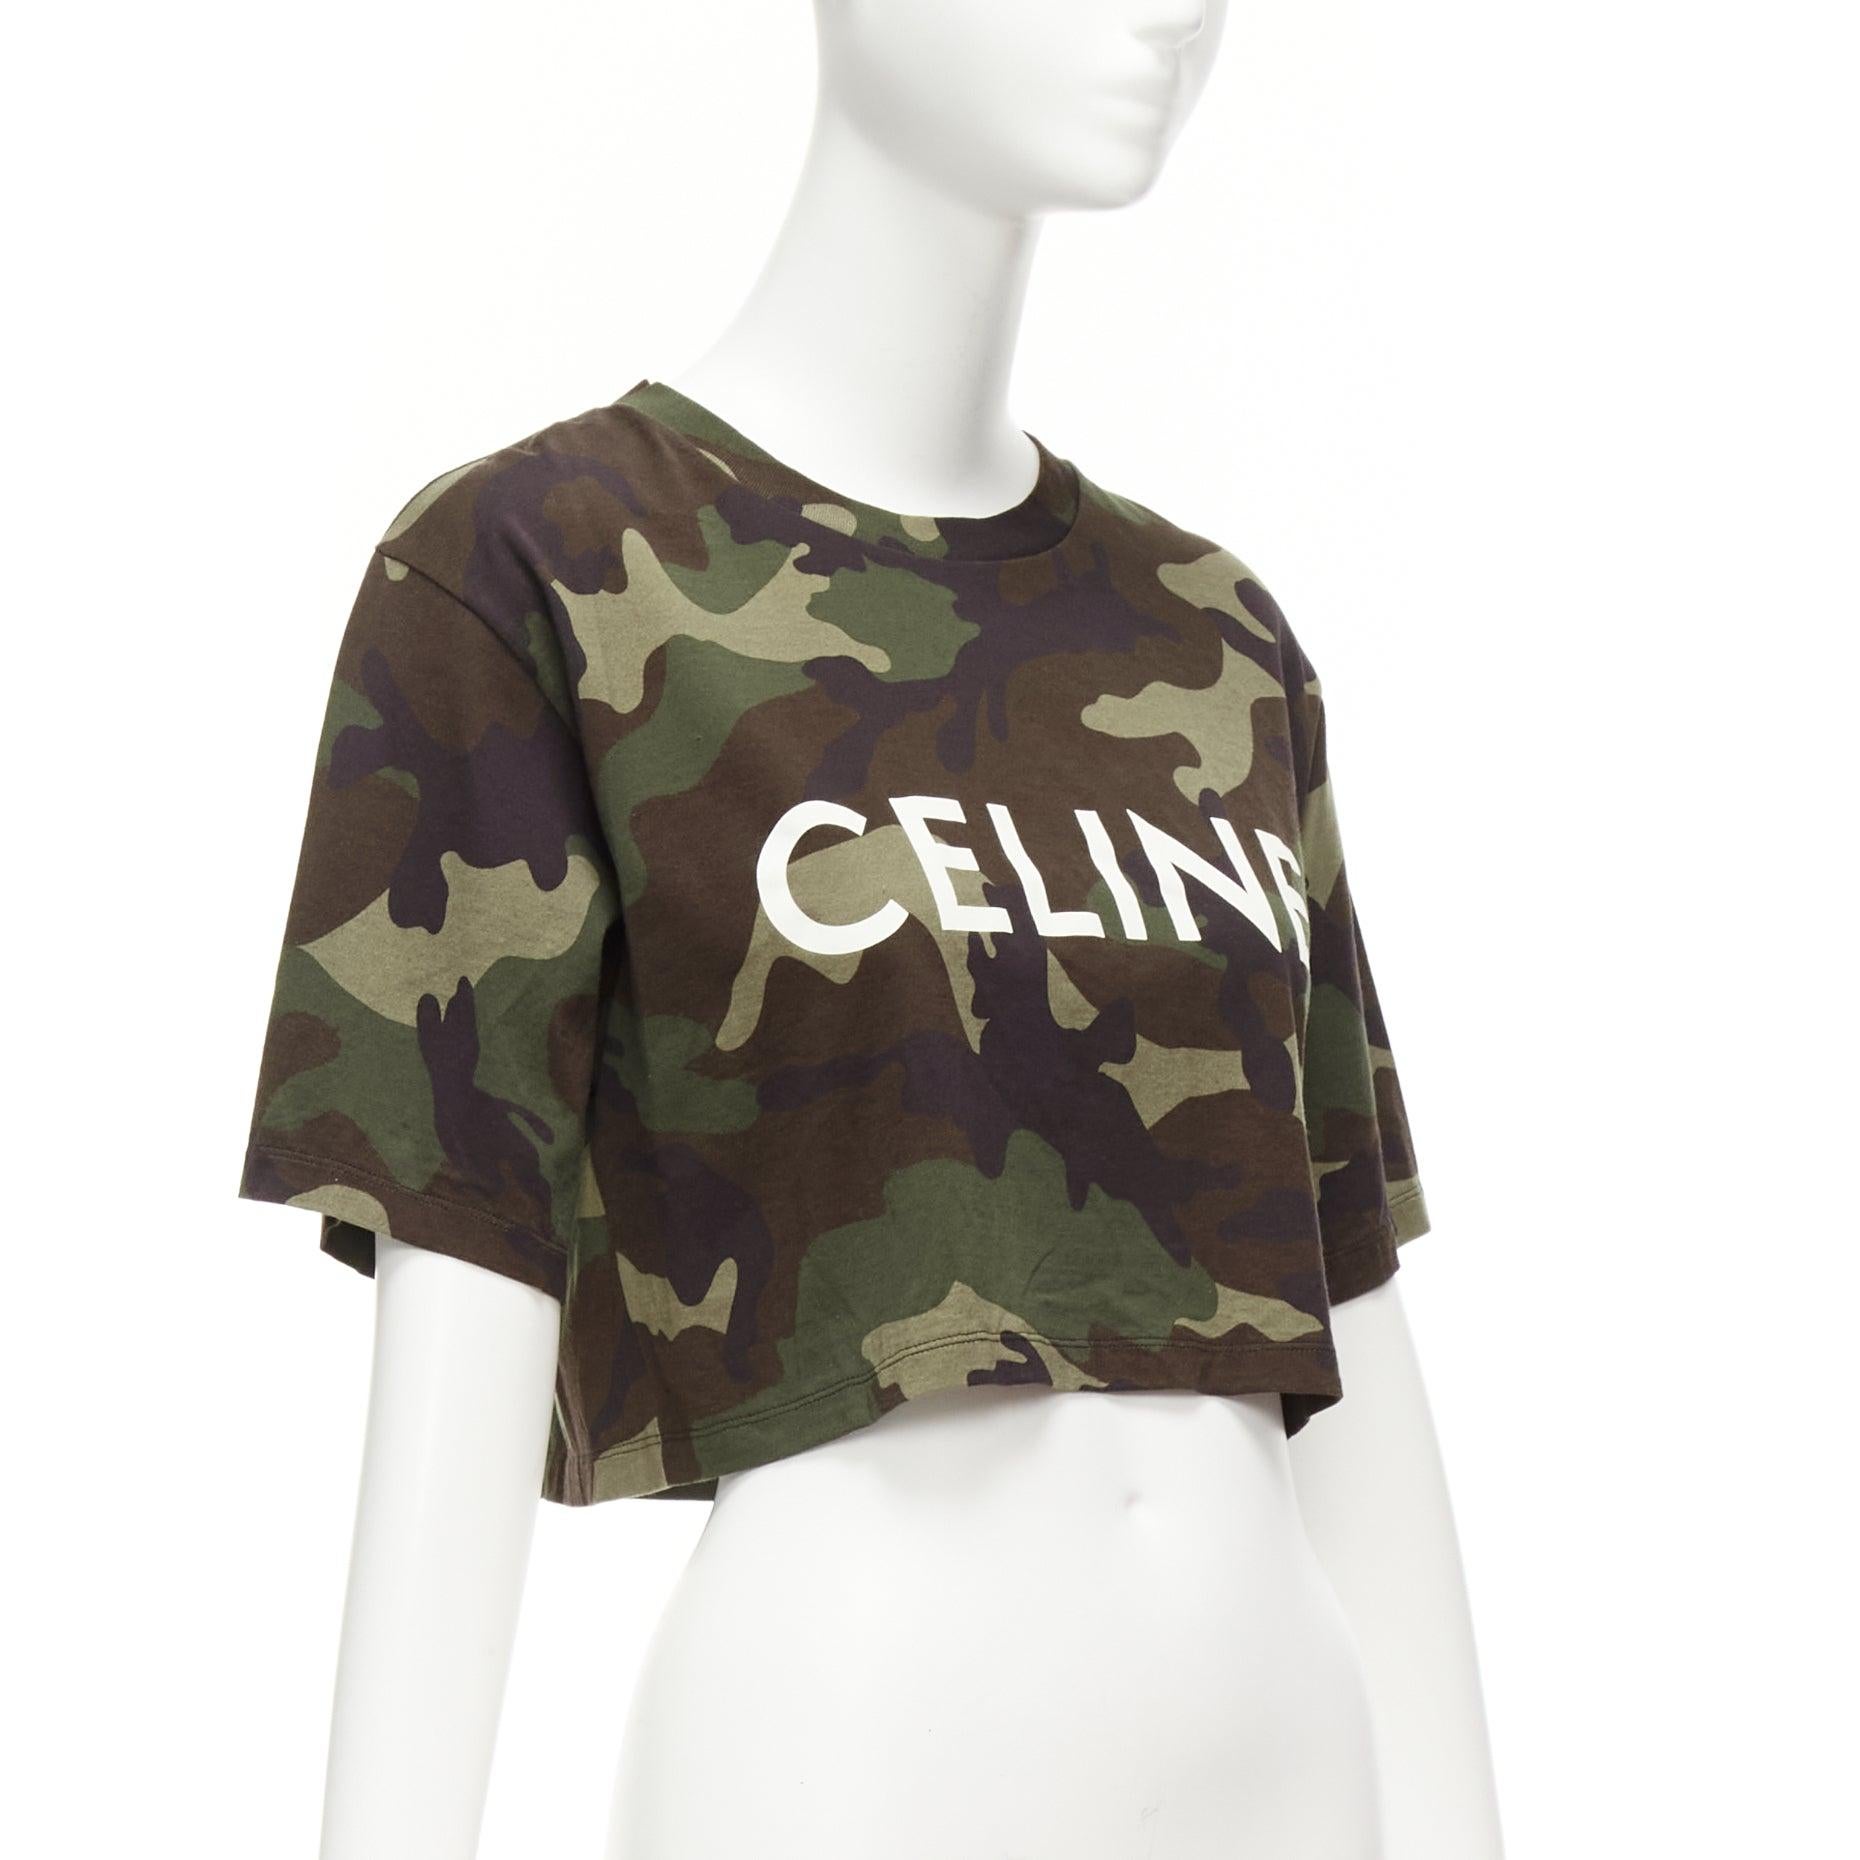 CELINE green camouflage cotton big white logo cropped tshirt top XS
Reference: AAWC/A01120
Brand: Celine
Designer: Hedi Slimane
Material: Cotton
Color: Green, Brown
Pattern: Camouflage
Closure: Pullover
Made in: Italy

CONDITION:
Condition: